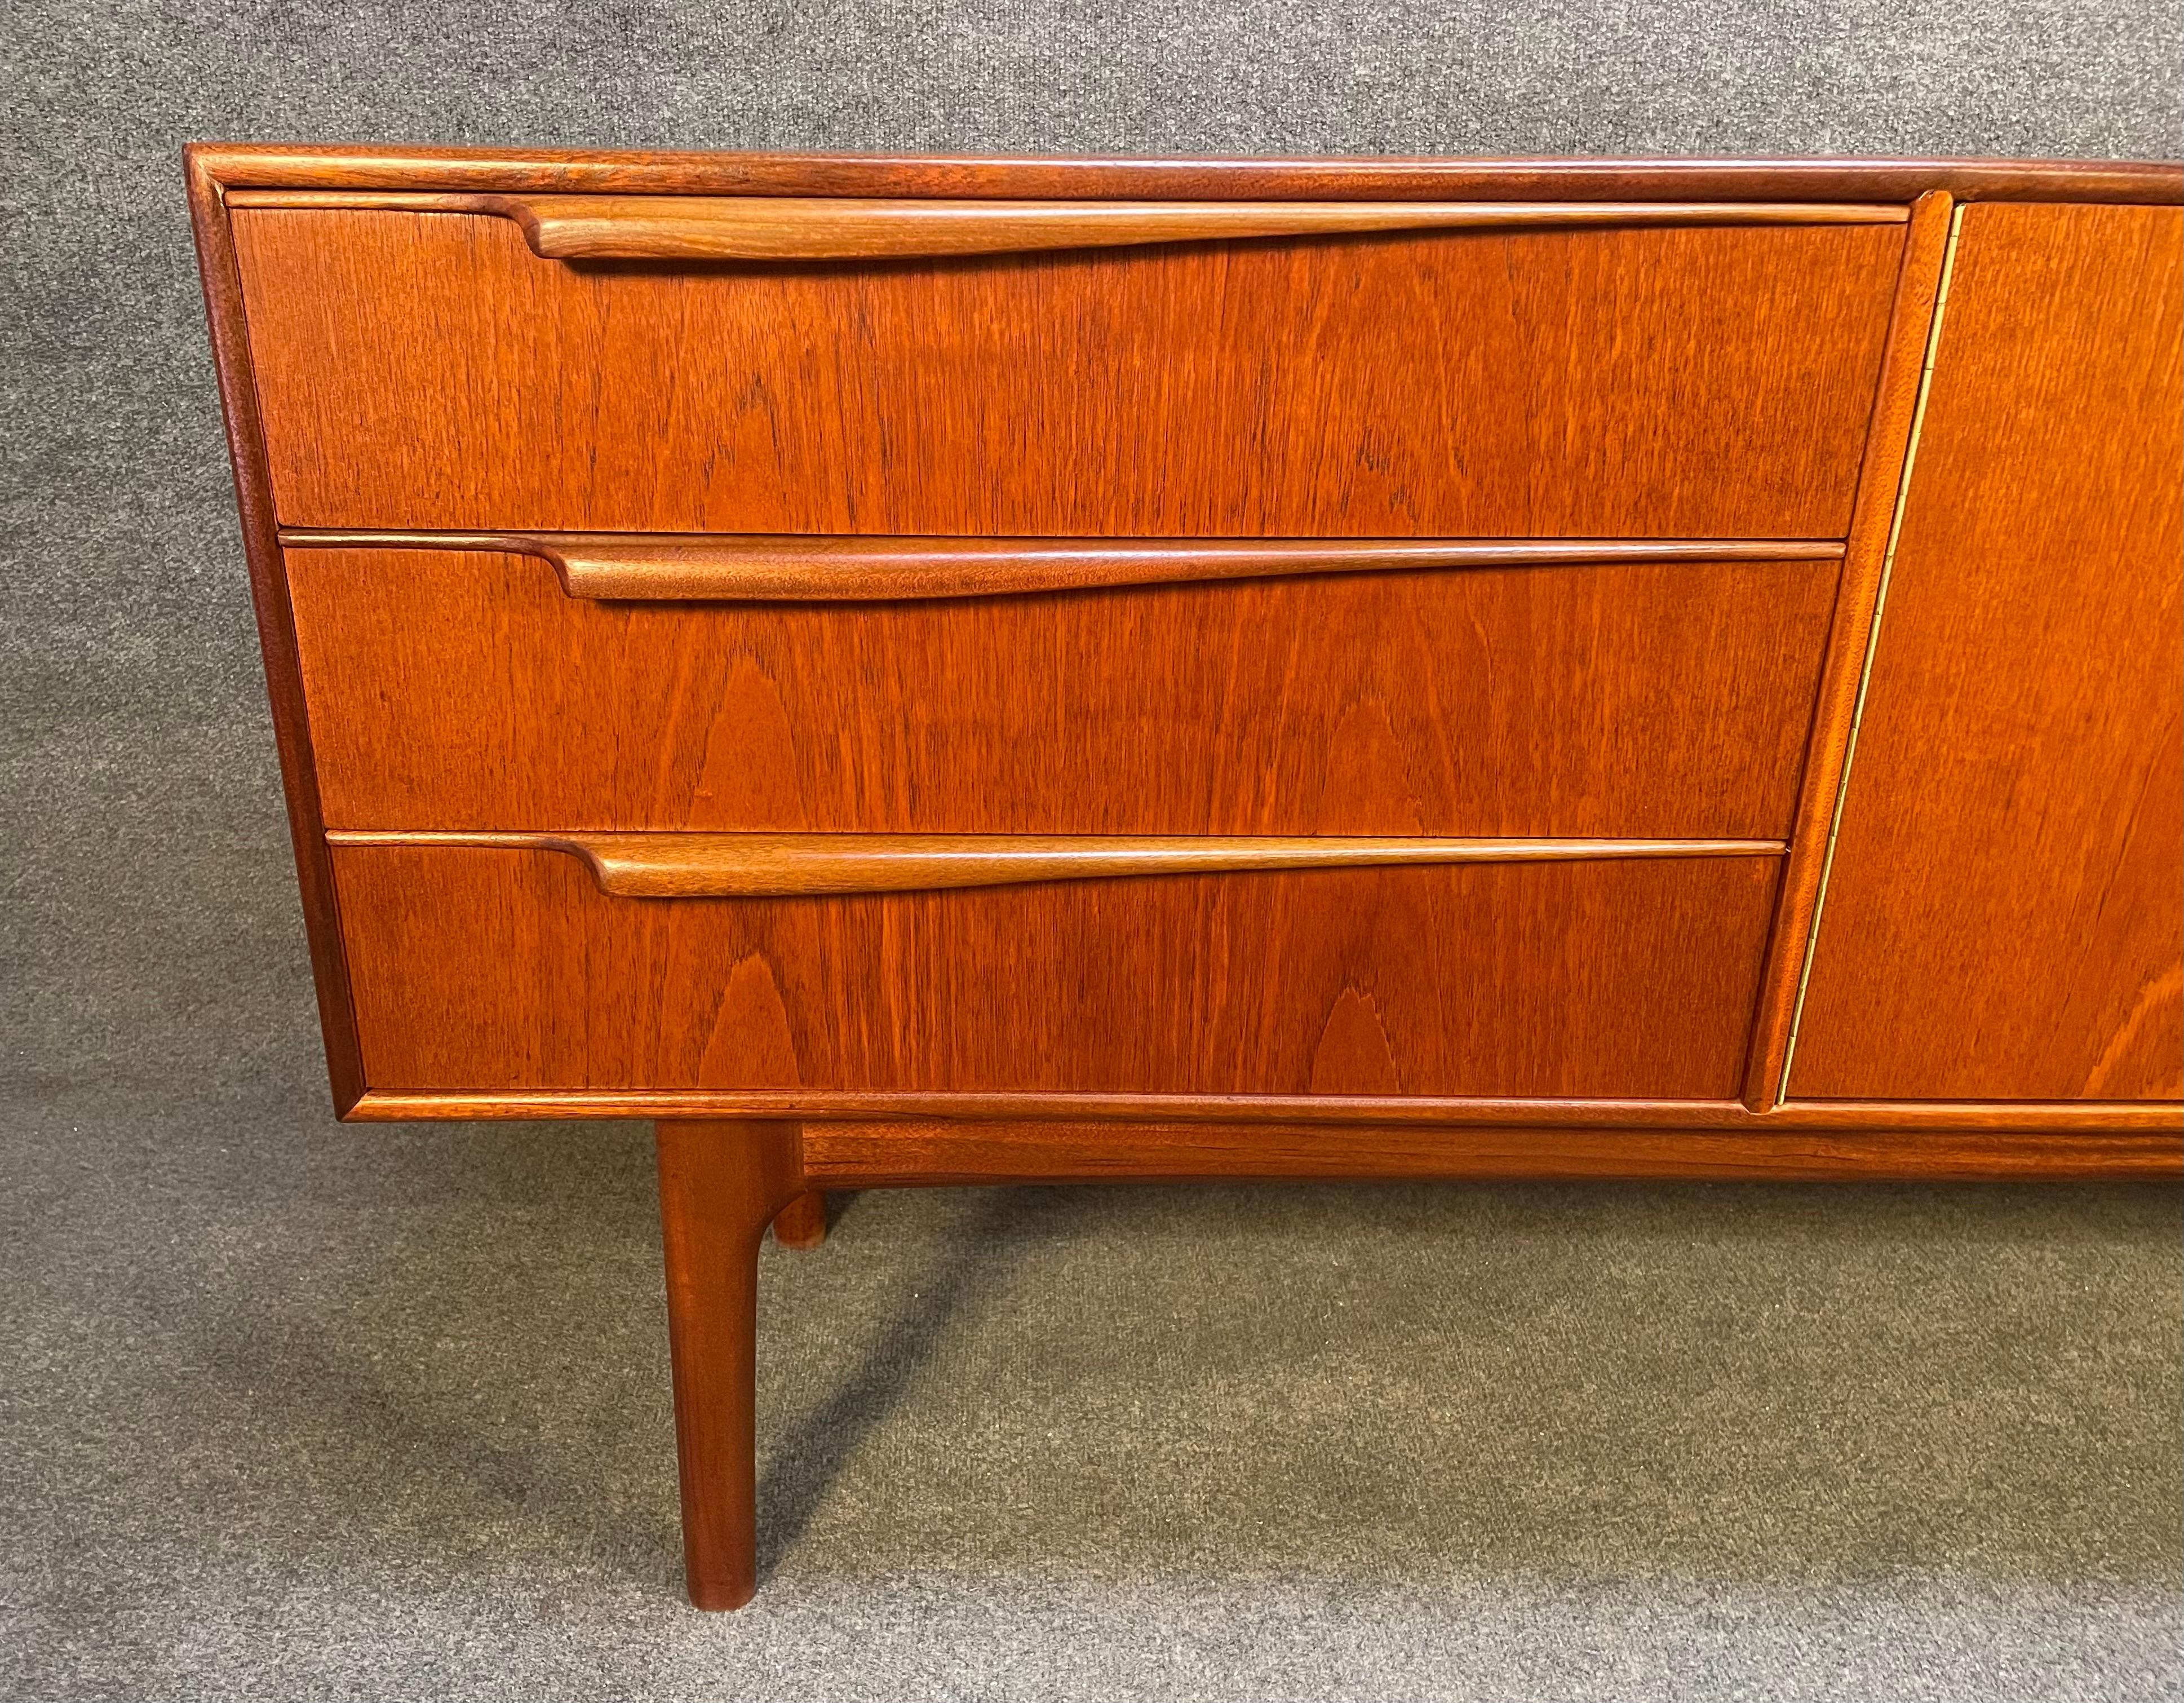 Here is a beautiful and rare British Mid-Century Modern sideboard manufactured in Scotland in the 1960s by A.H McIntosh Ltd.
This exquisite piece, recently imported from Europe tom California before its refinishing, features a vibrant wood grain, a